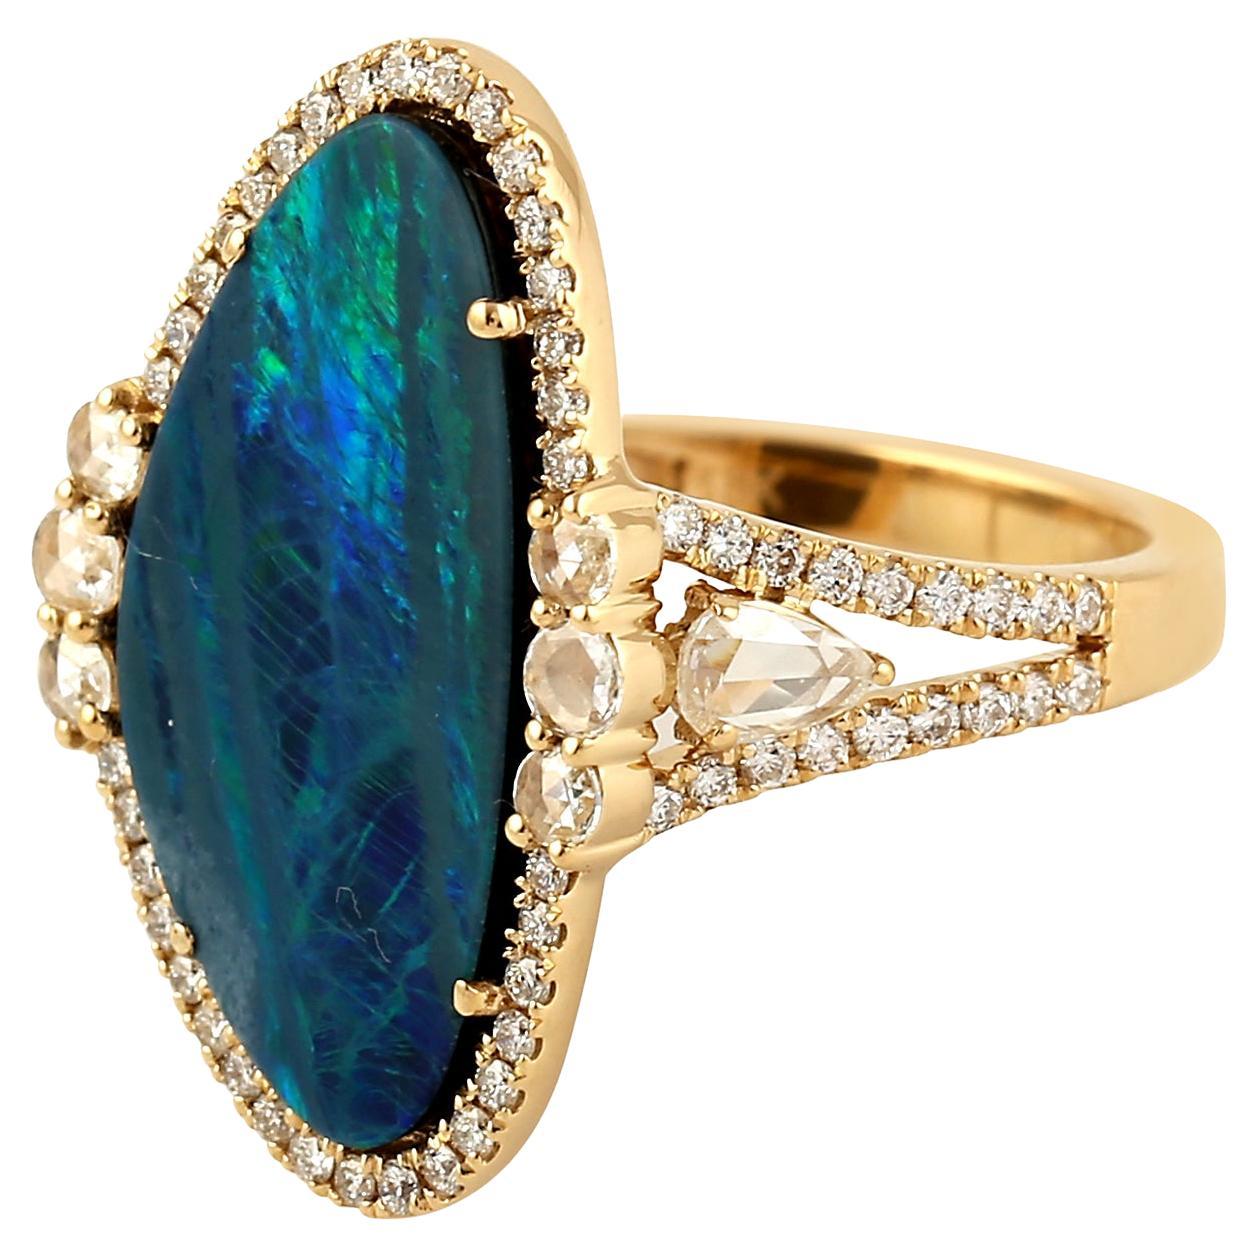 Opal & Diamond Ring With Rose Cut Diamond On Side Made in 18k Yellow Gold For Sale